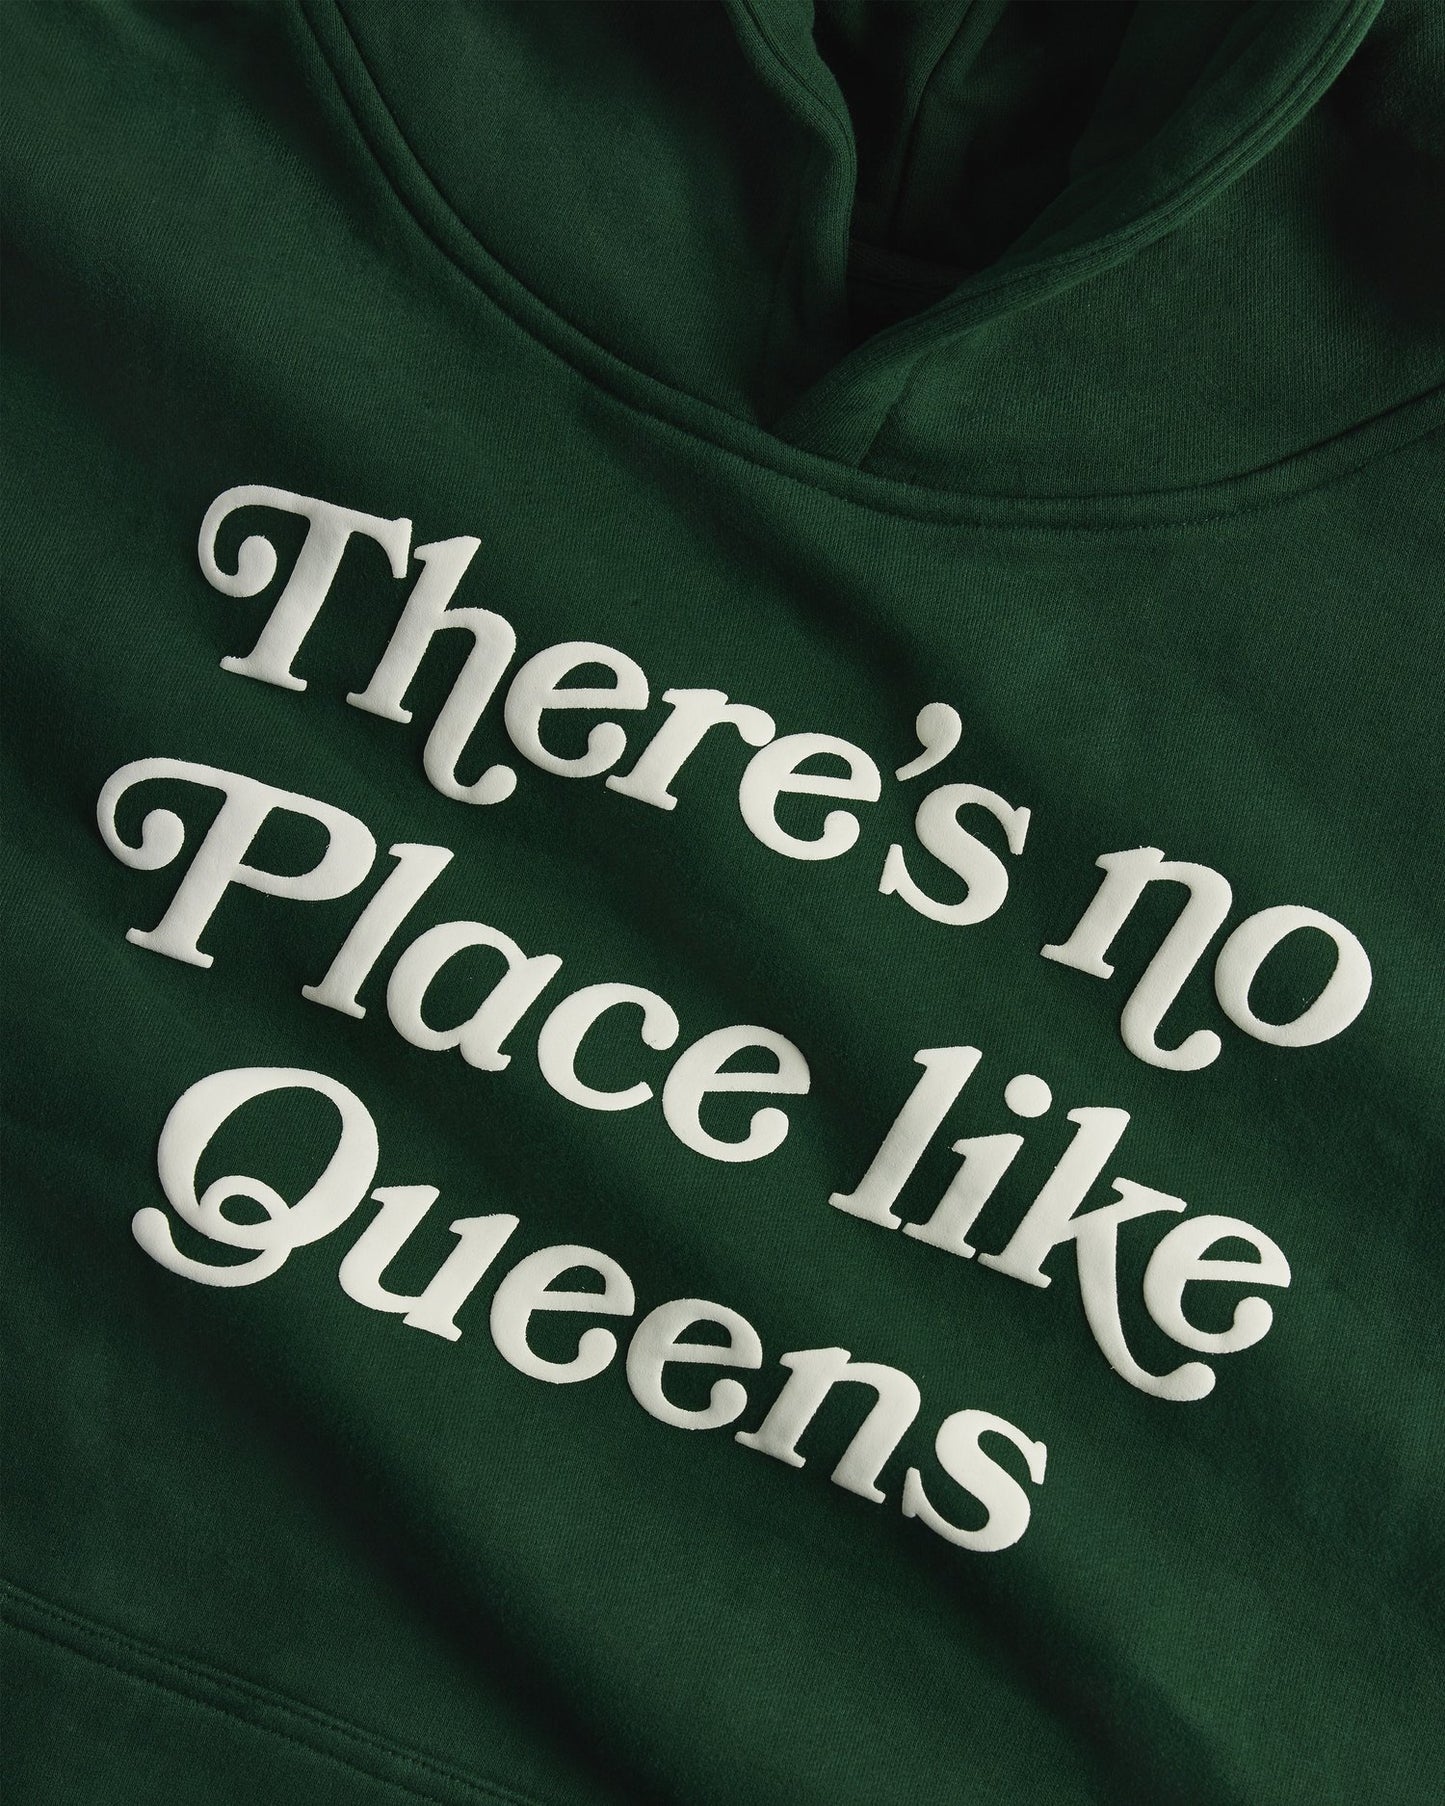 There's No Place Like Queens Hoodie